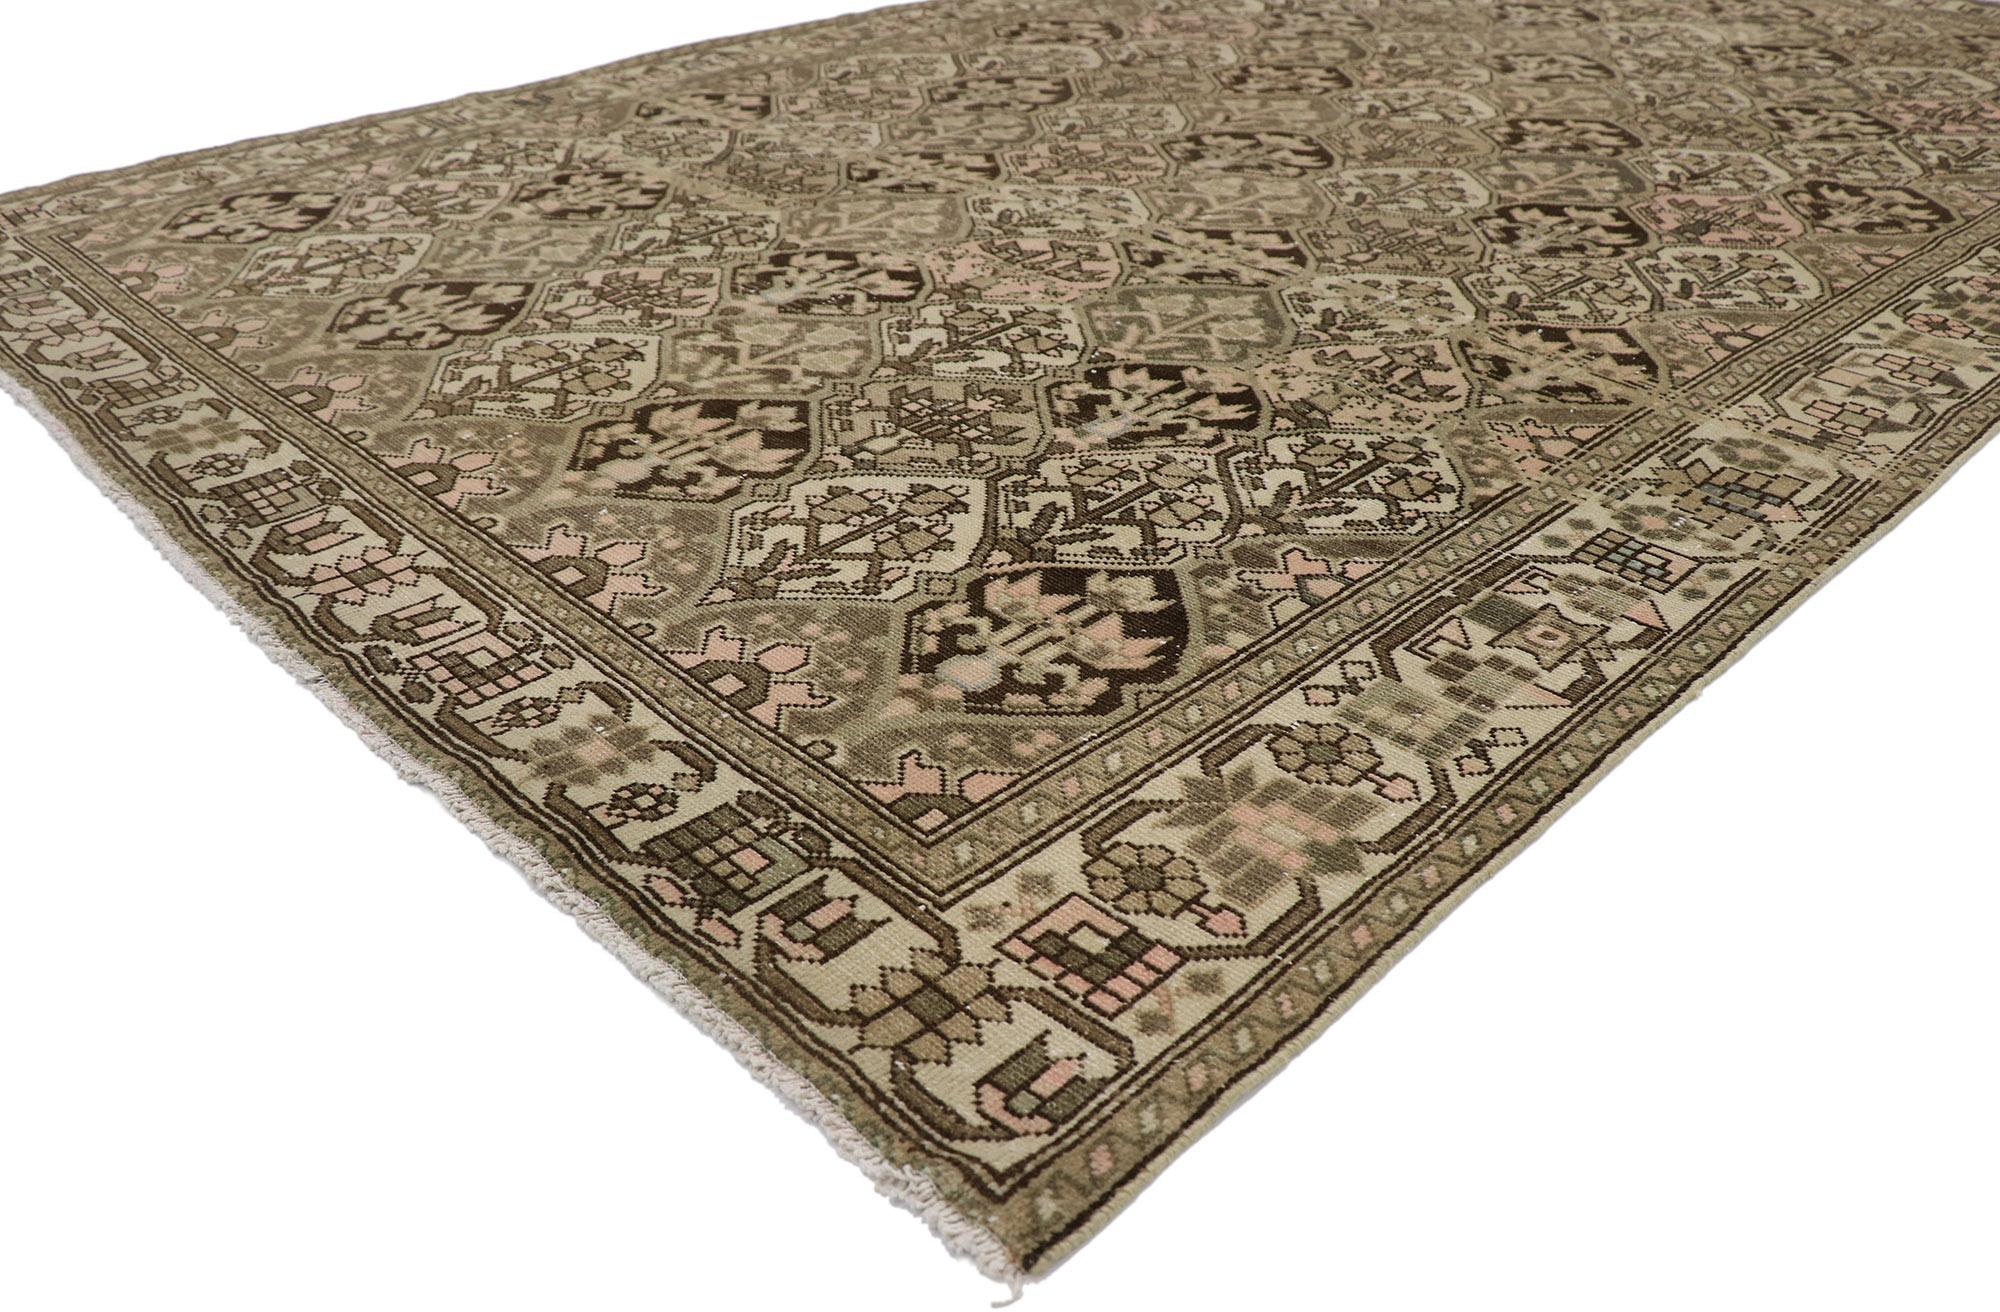 60942, distressed antique Persian Bakhtiari rug. With its rustic sensibility and timeless botanical pattern, this hand-knotted wool distressed antique Persian Bakhtiari rug will take on a curated lived-in look that feels timeless while imparting a